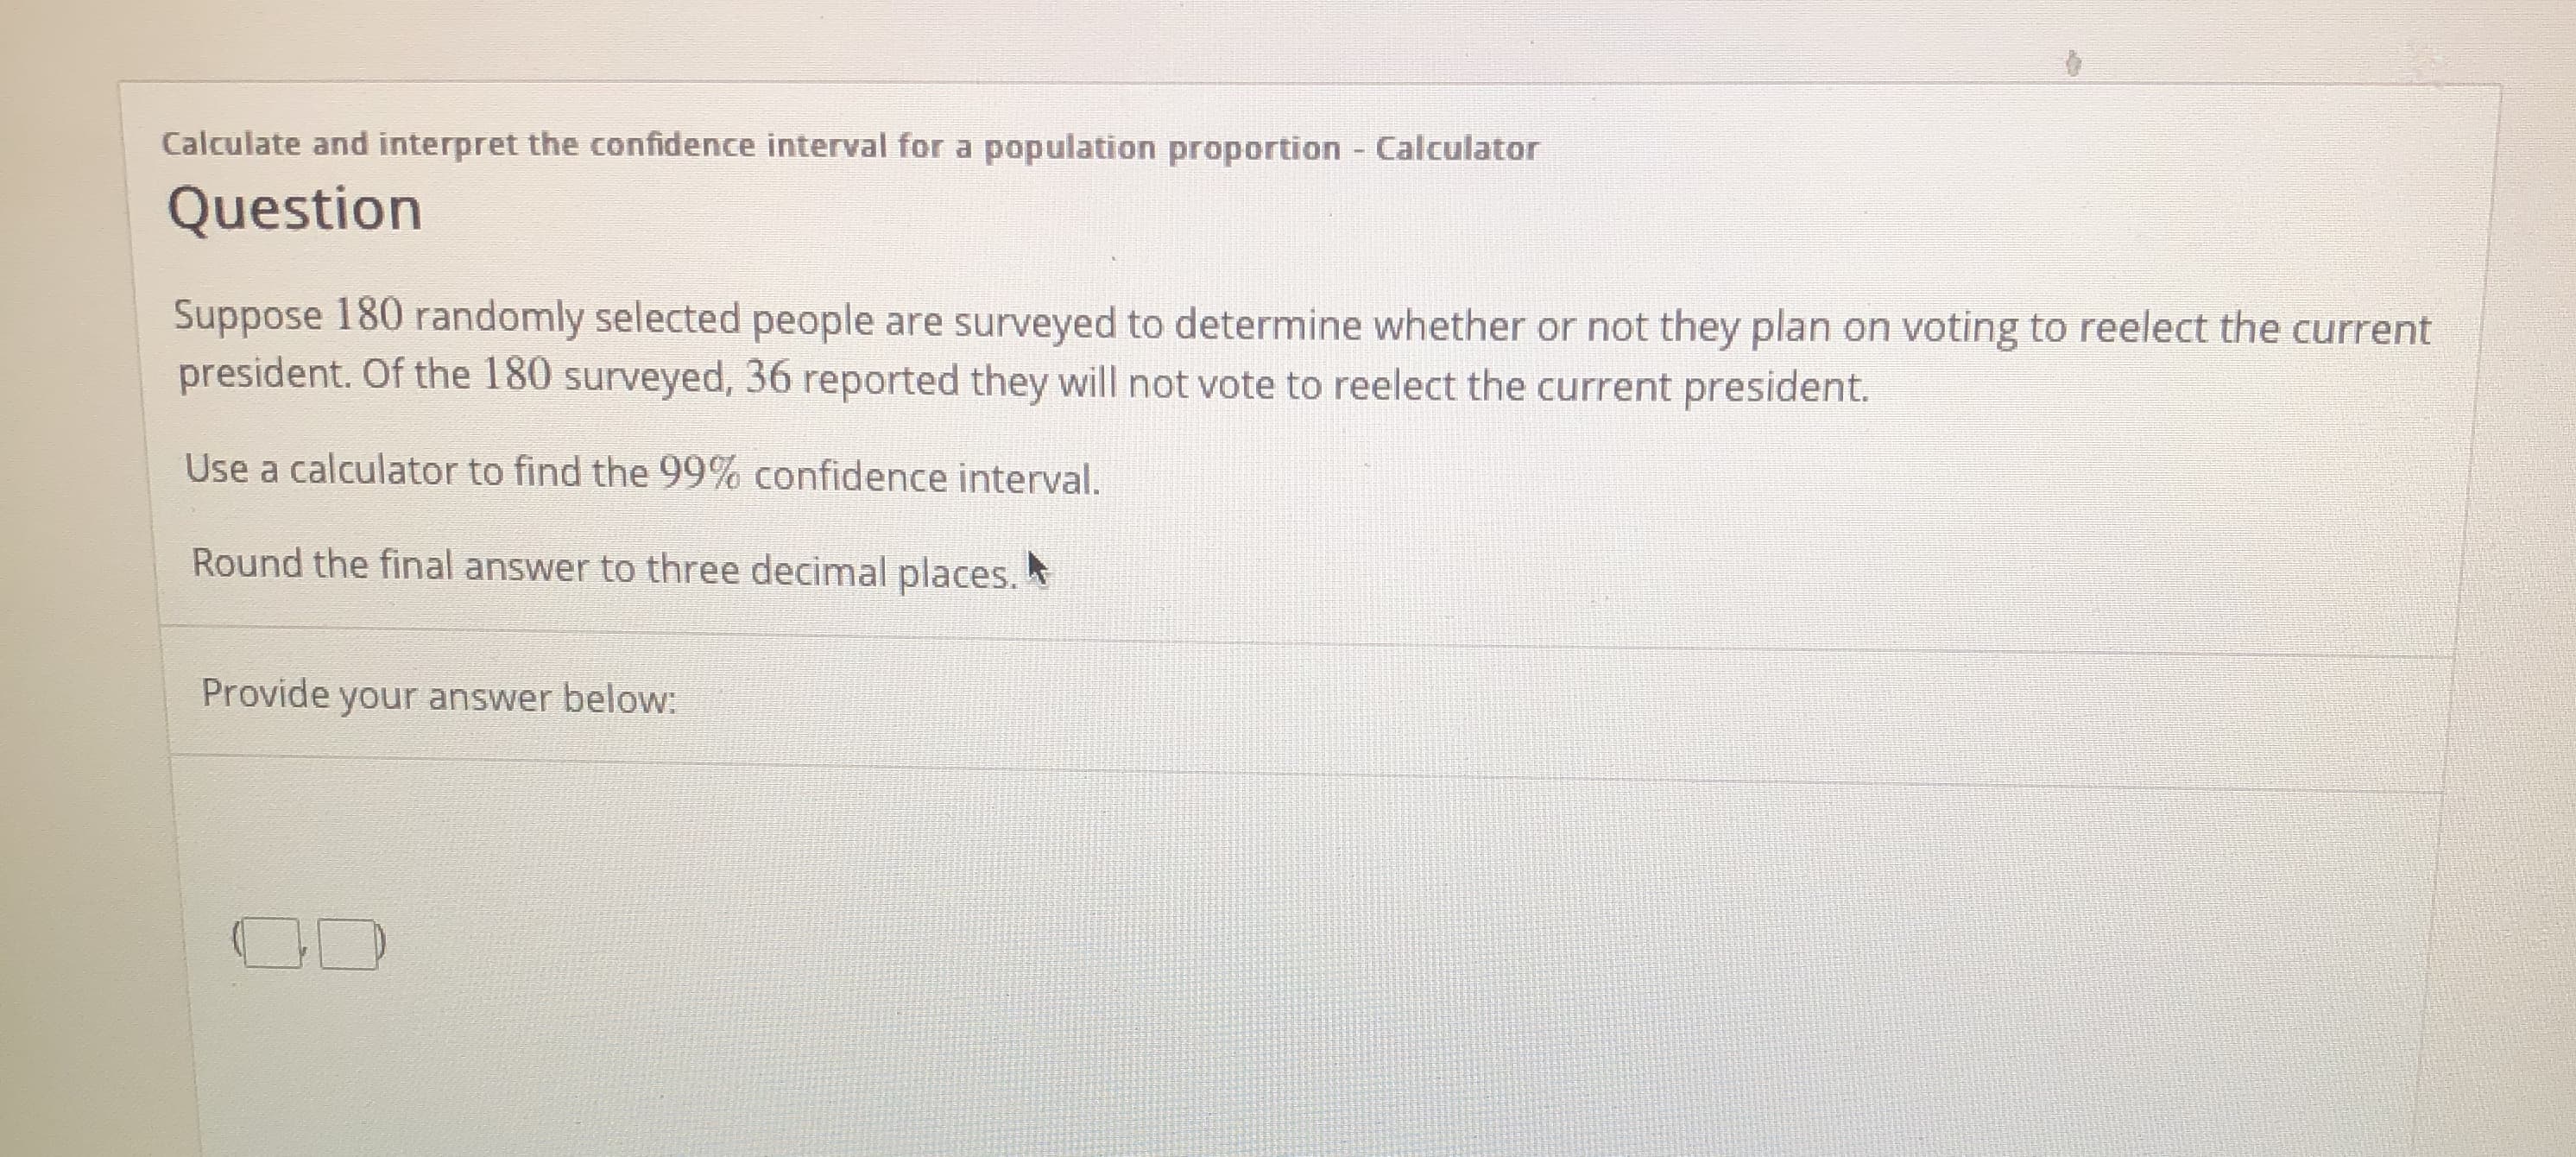 Calculate and interpret the confidence interval for a population proportion - Calculator
Question
Suppose 180 randomly selected people are surveyed to determine whether or not they plan on voting to reelect the current
president. Of the 180 surveyed, 36 reported they will not vote to reelect the current president.
Use a calculator to find the 99% confidence interval.
Round the final answer to three decimal places.
Provide your answer below:
